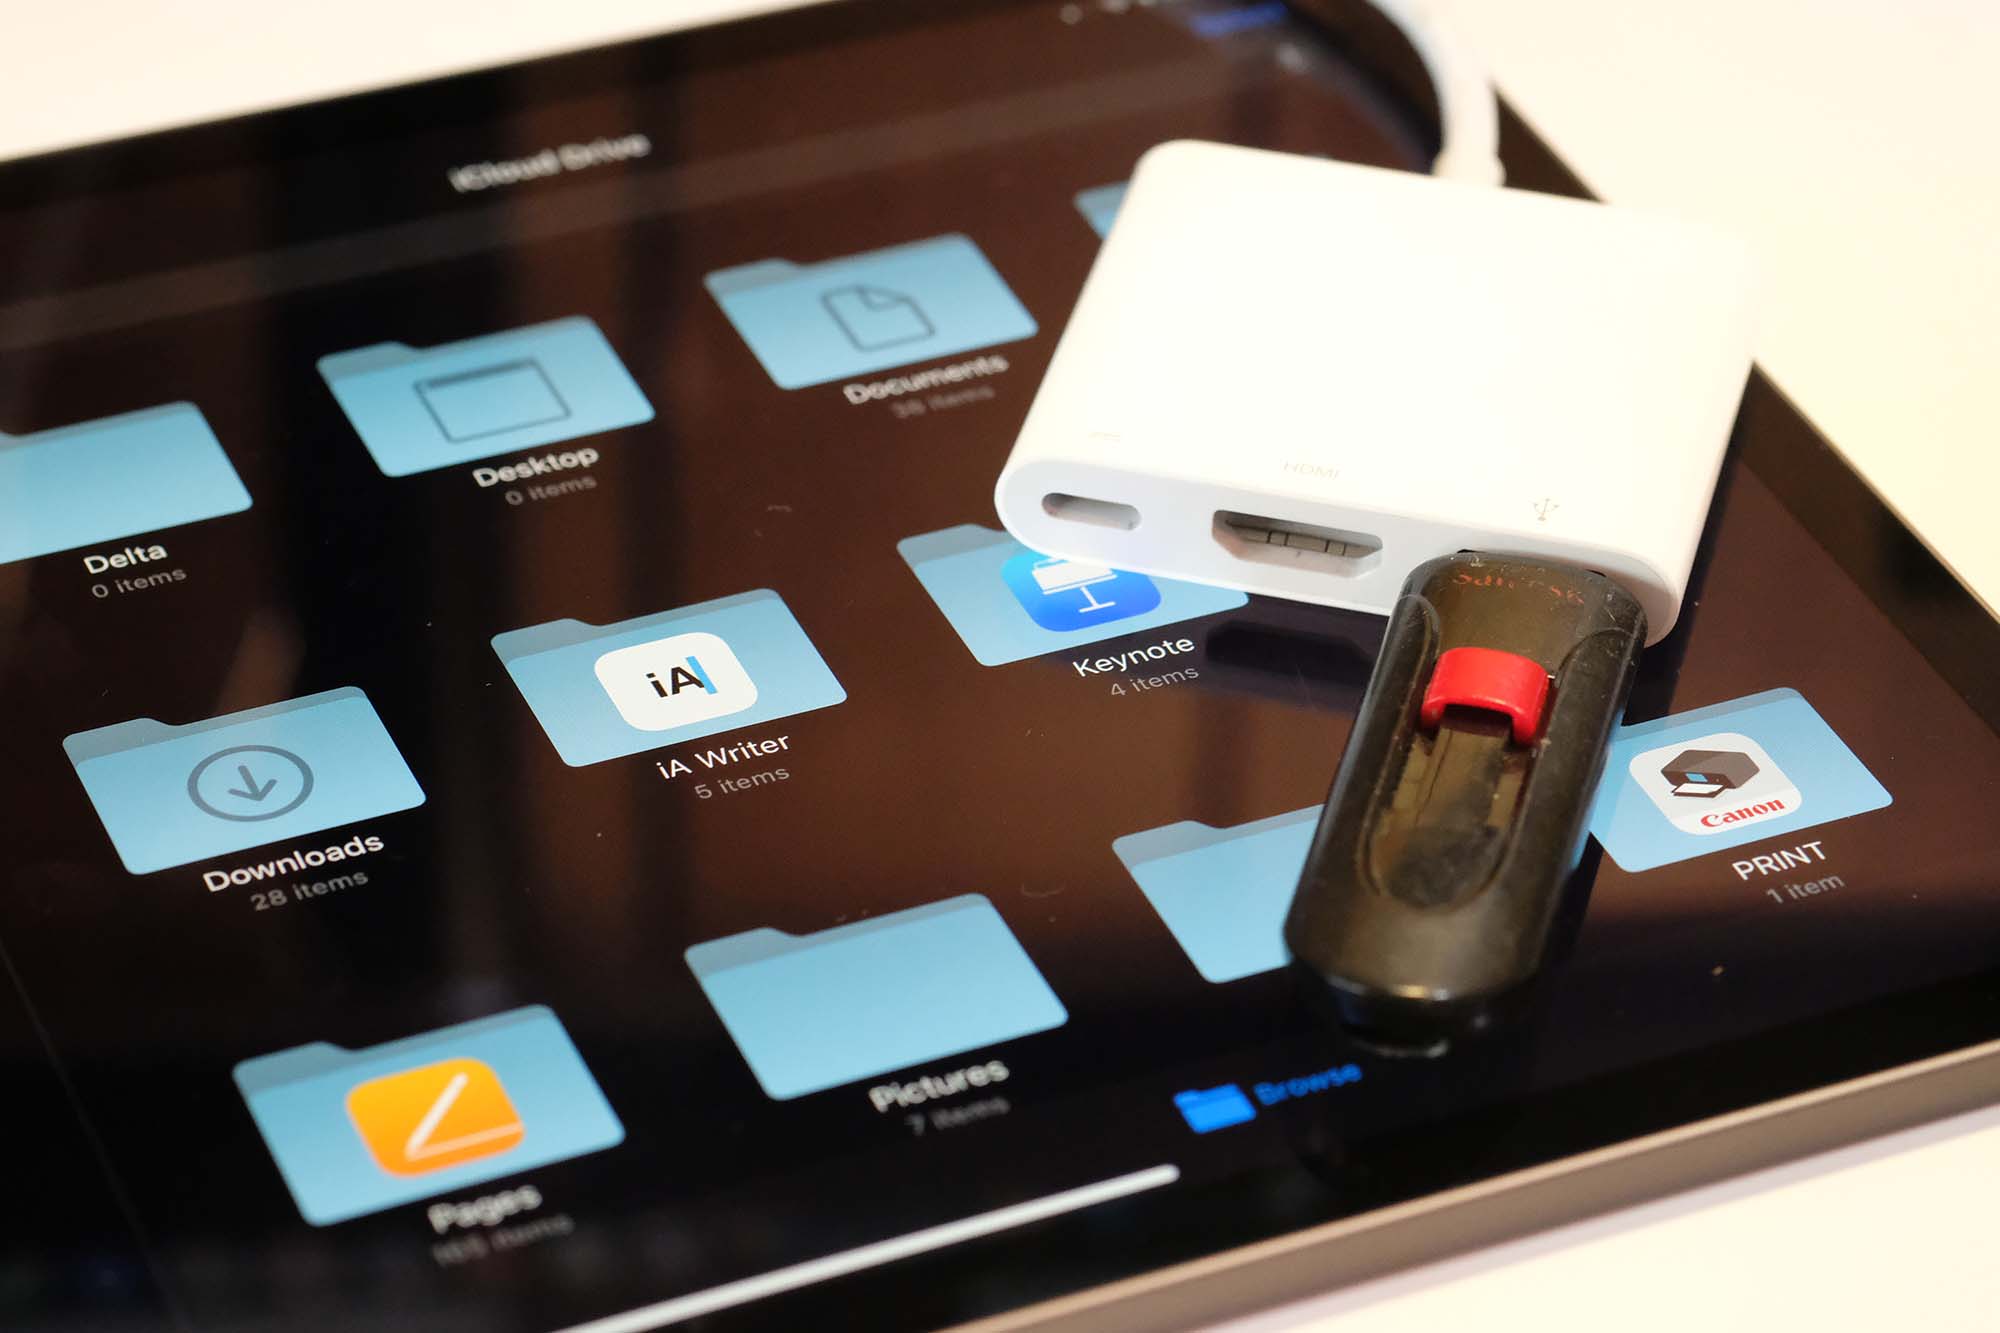 How to use a flash drive, hard disk, SSD, and SD card with iPad